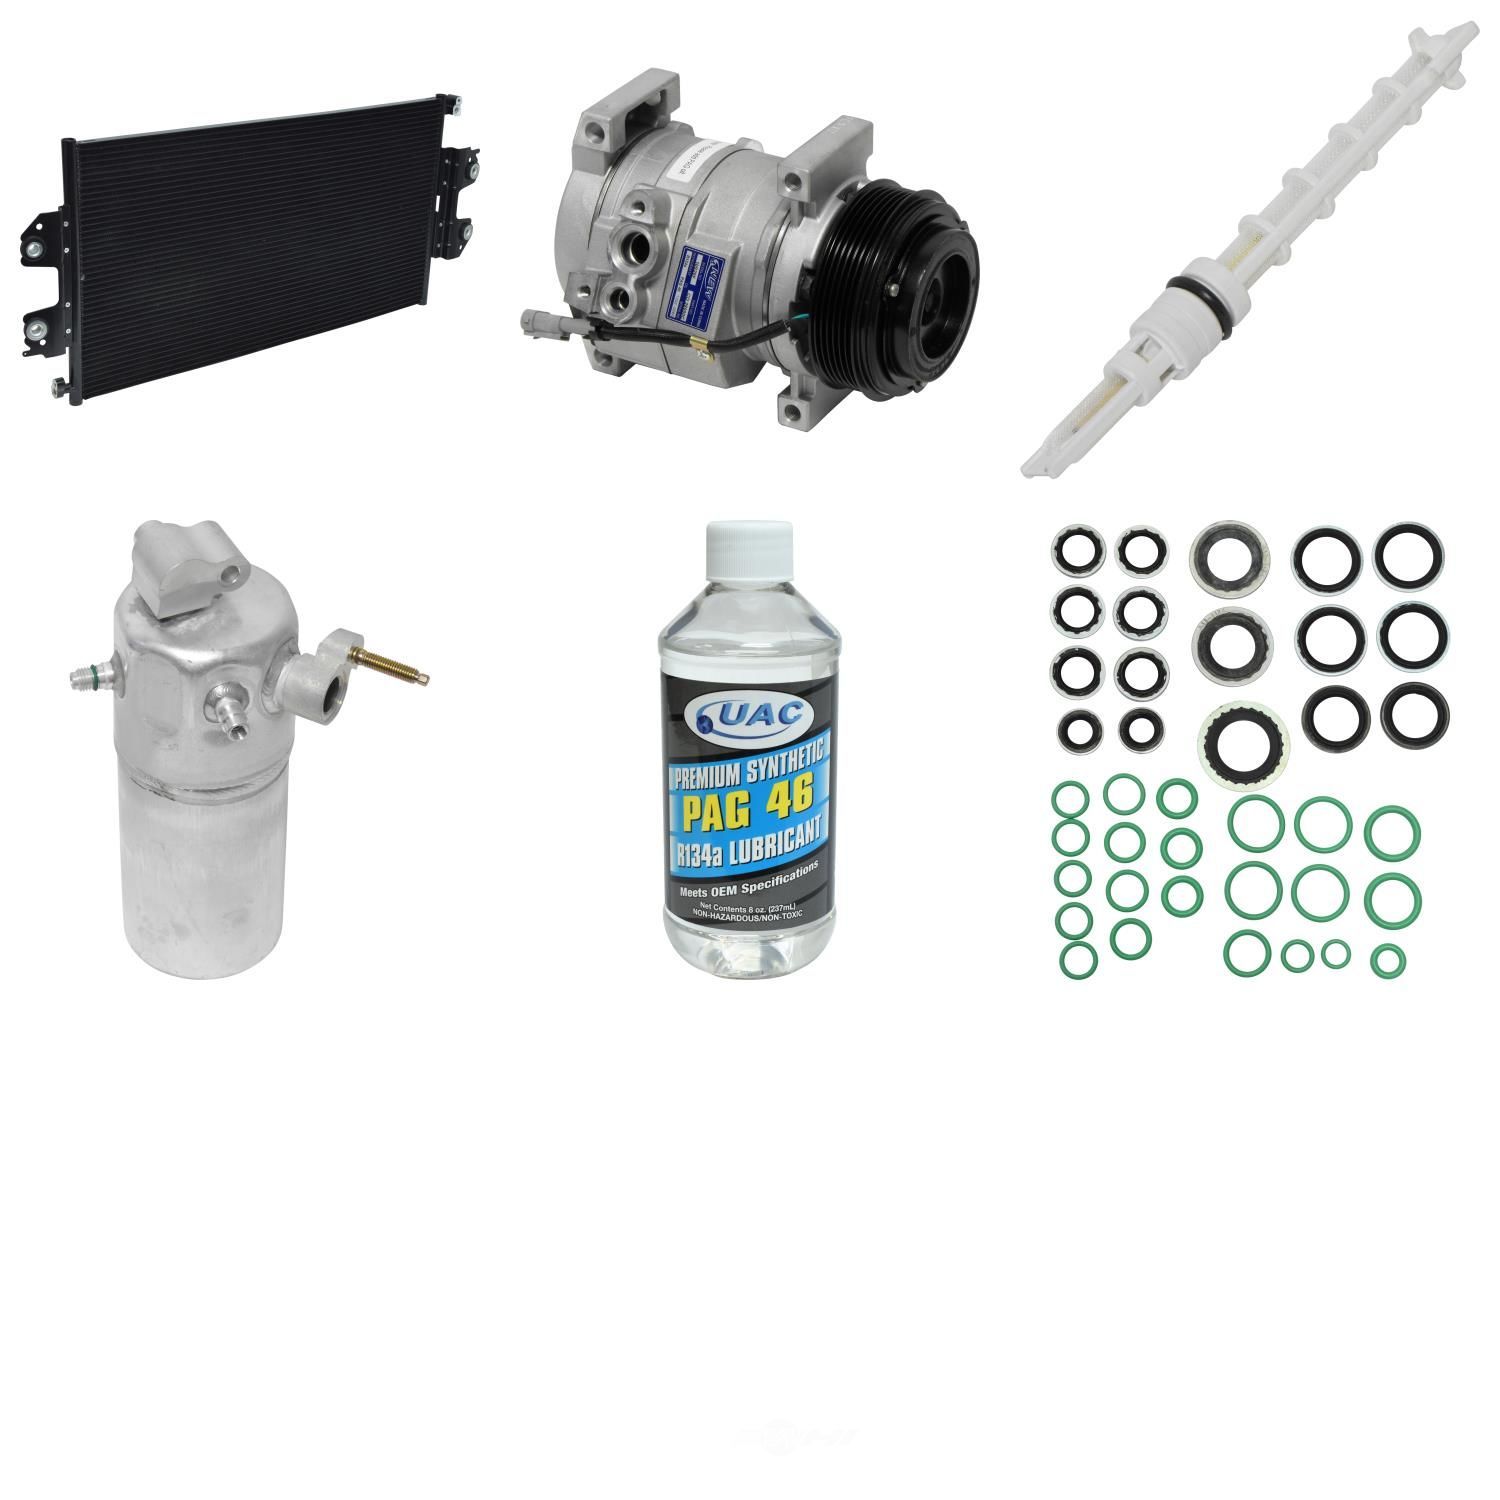 UNIVERSAL AIR CONDITIONER, INC. - Compressor-condenser Replacement Kit - UAC KT 4666A